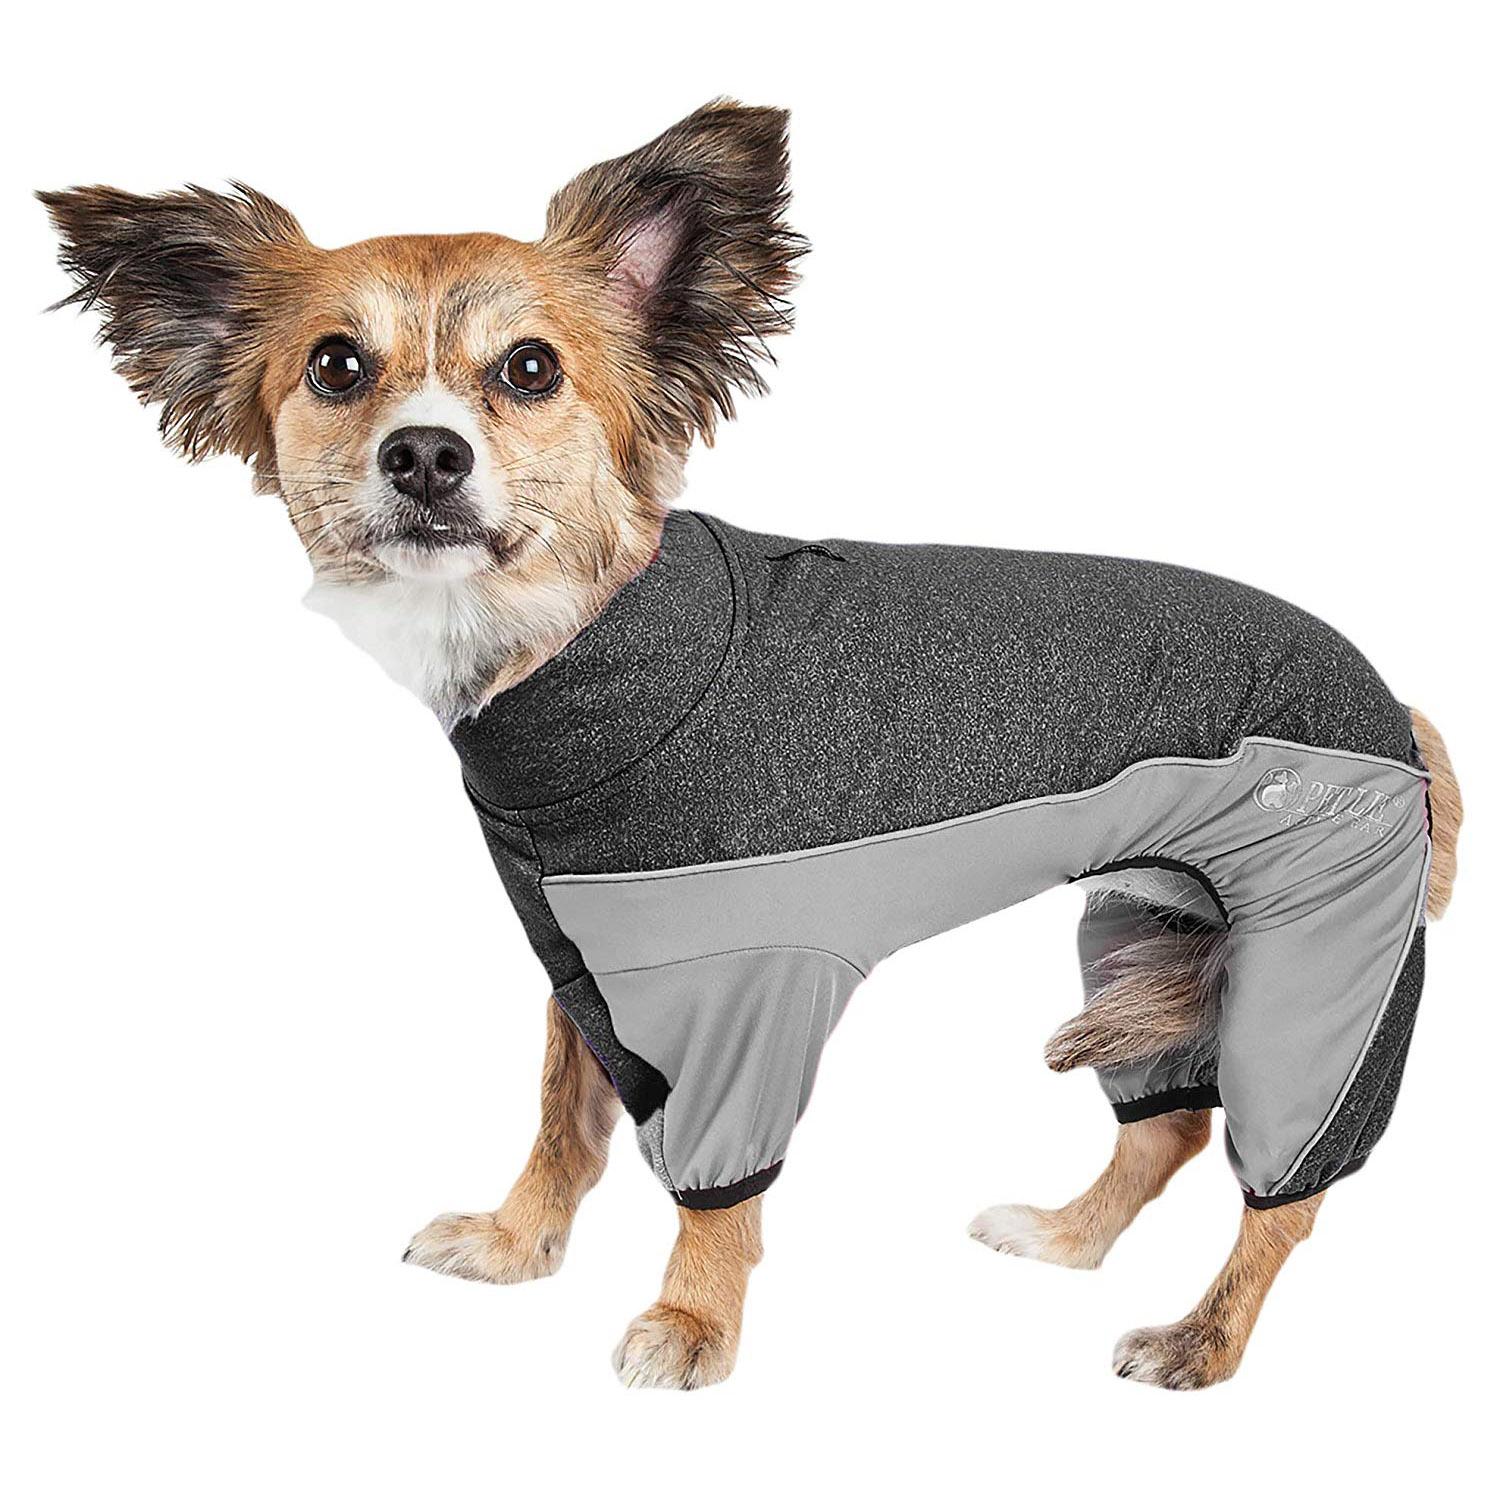 Pet Life ACTIVE Chase Pacer Performance Full Body Dog Warm Up - Charcoal Gray